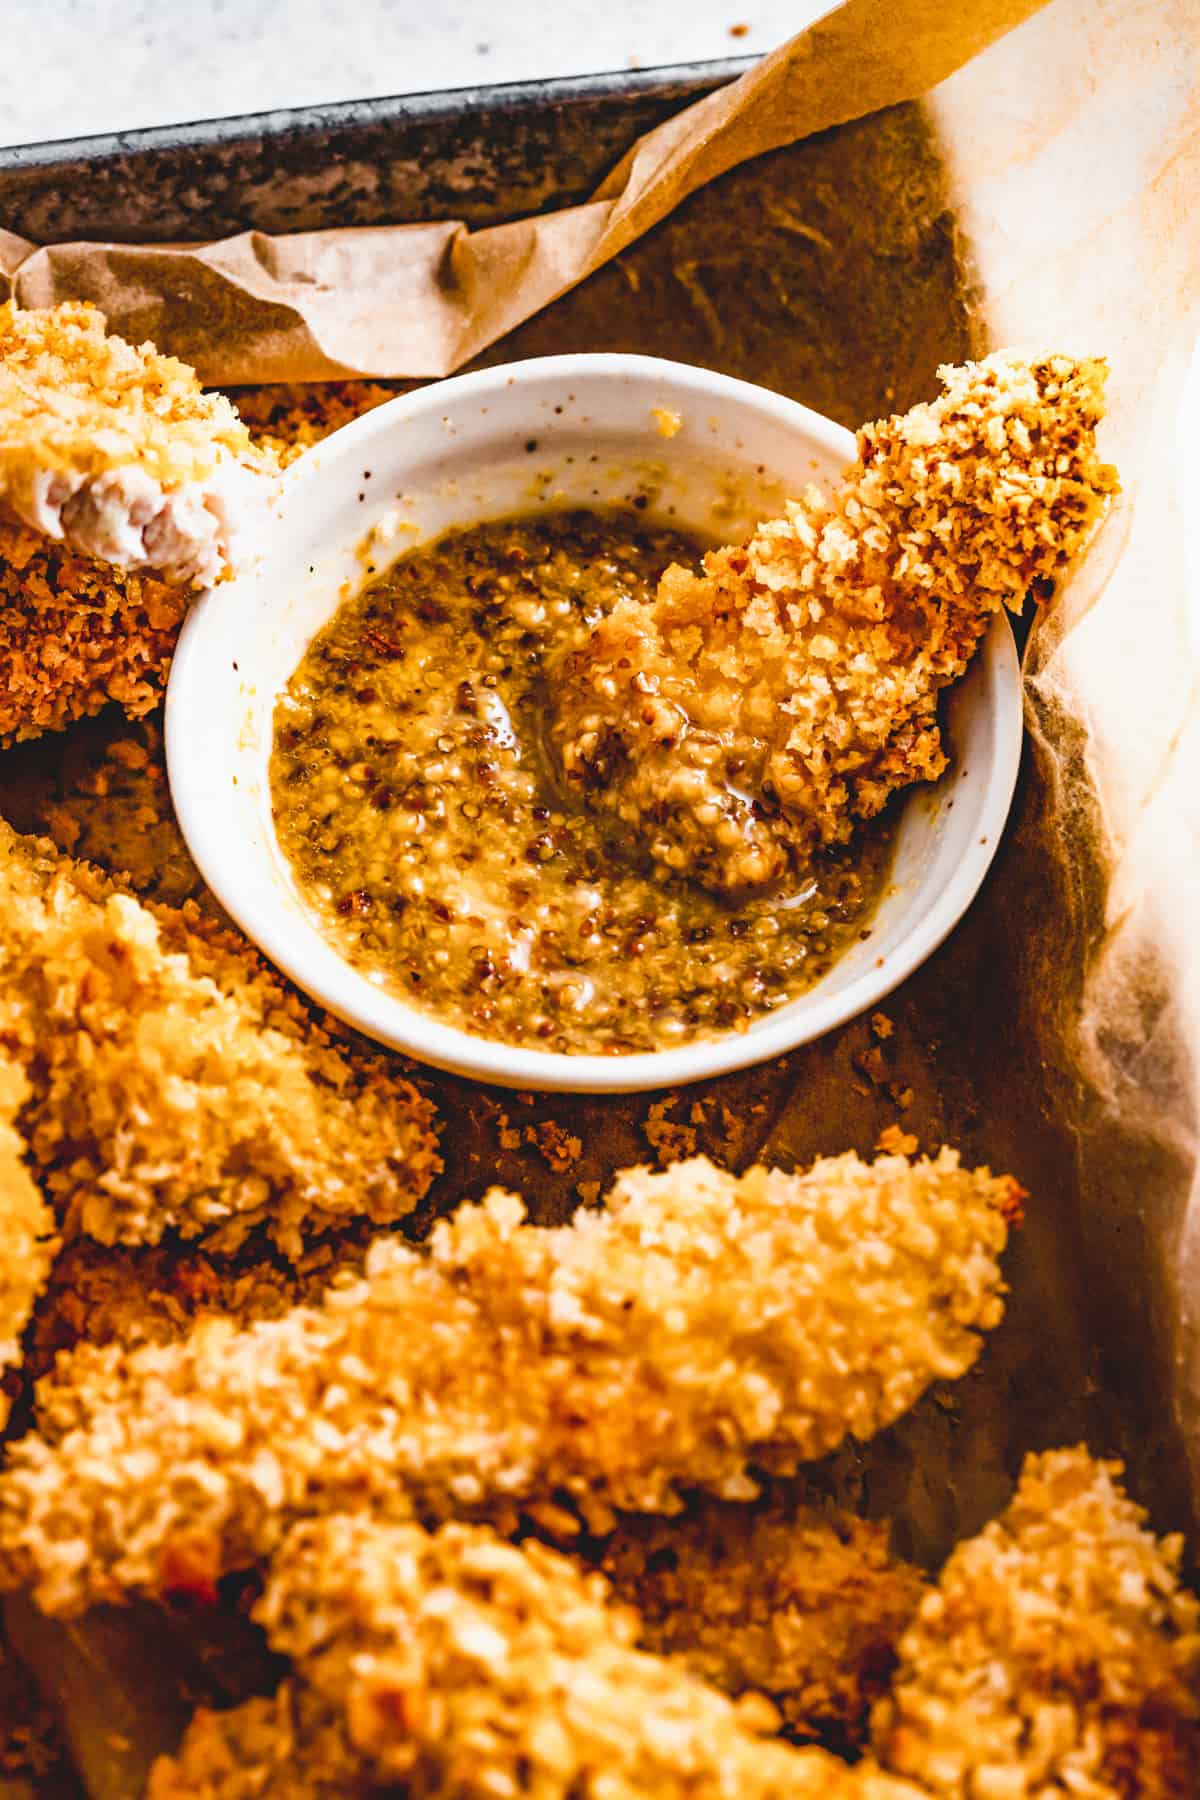 Dipping chicken tenders into a dipping sauce, with other chicken tender pieces arranged around the bowl of sauce.